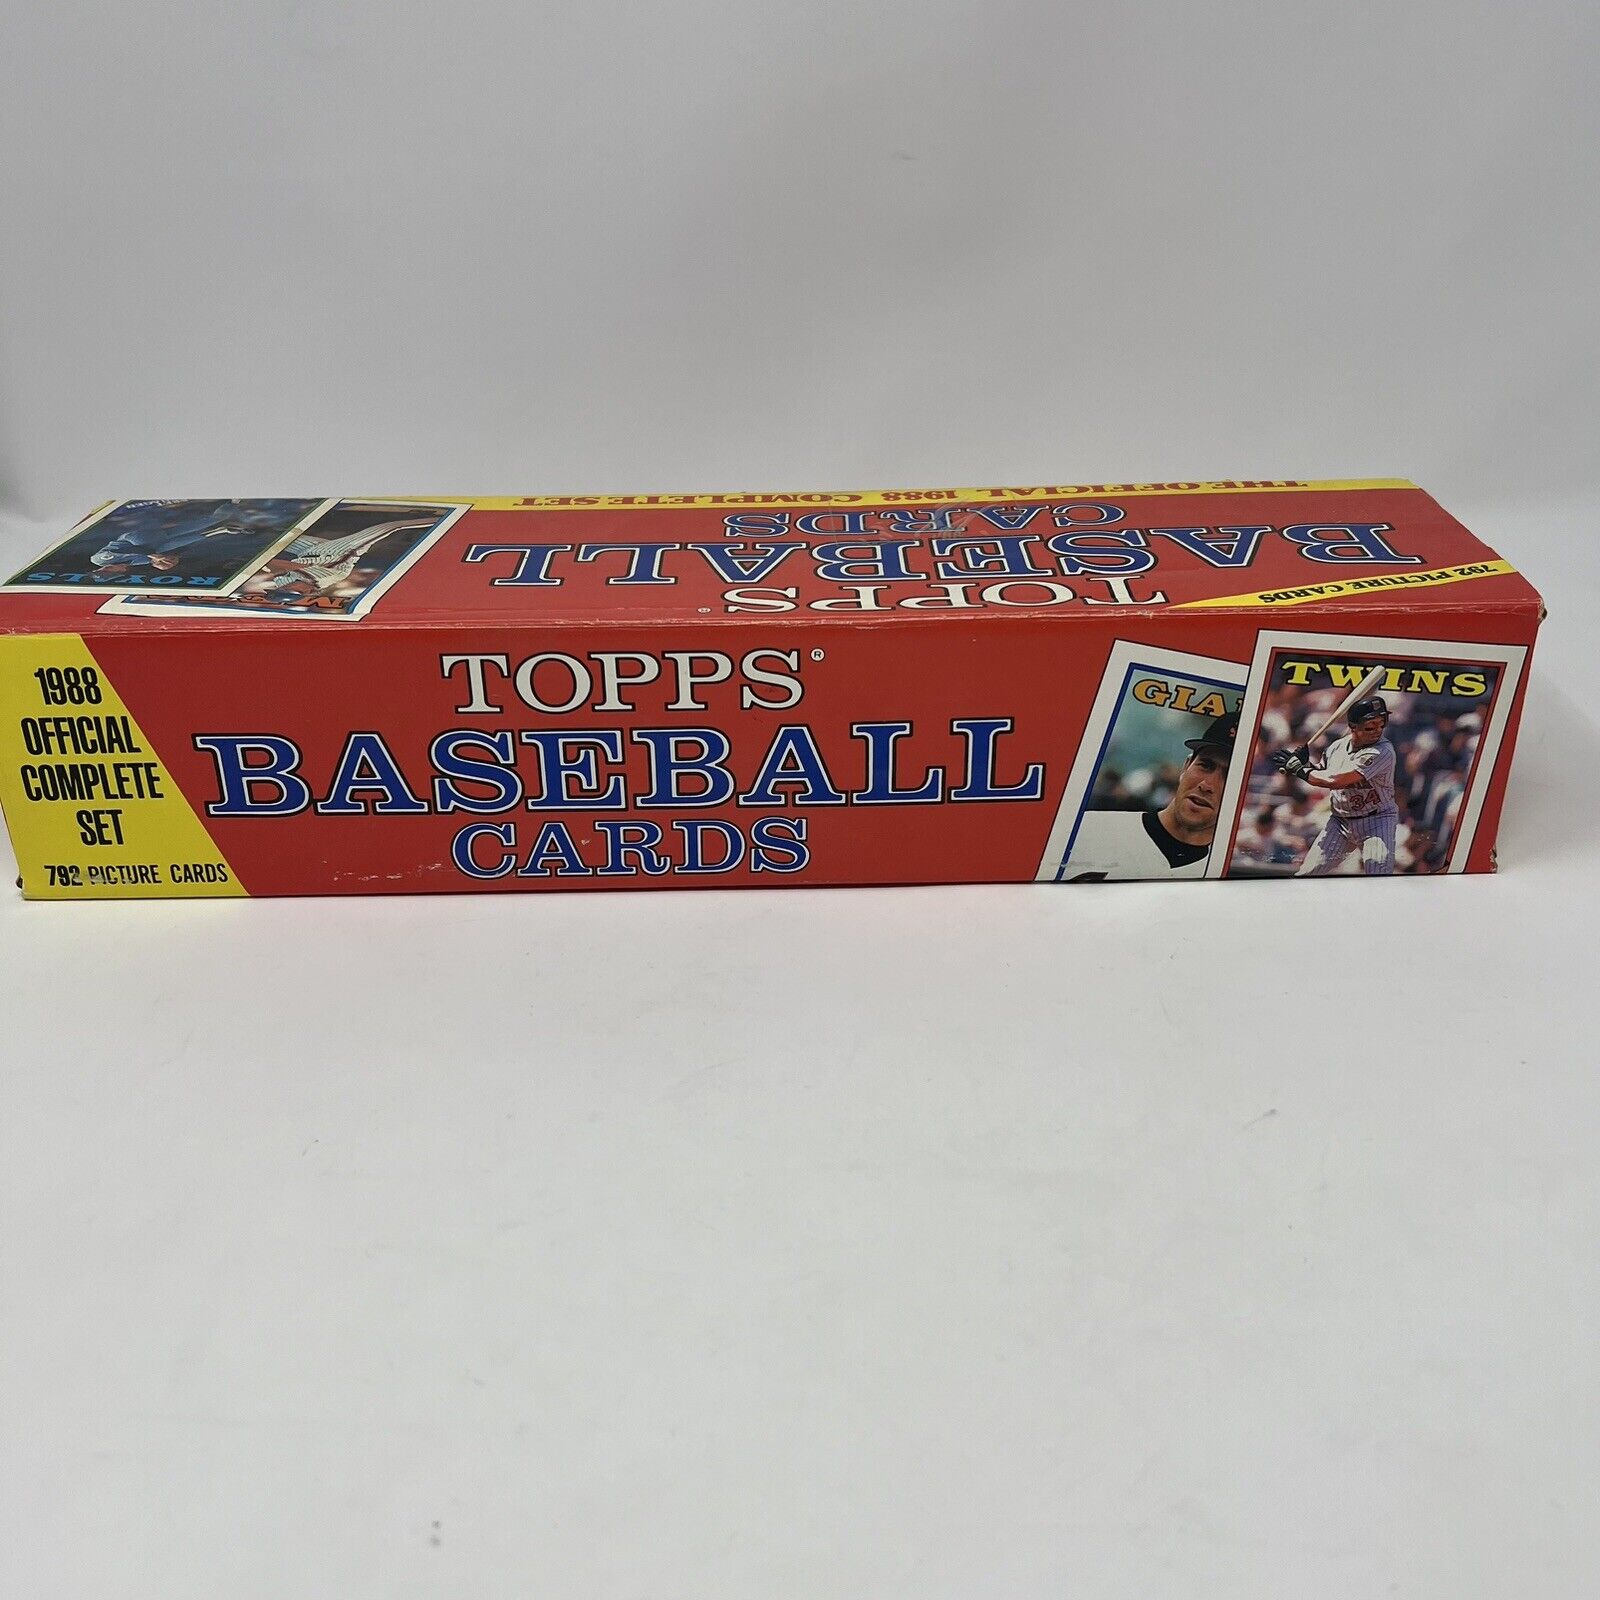 NEW 1988 TOPPS BASEBALL FACTORY-SEALED OFFICIAL COMPLETE SET OF 792 PLAYER CARDS